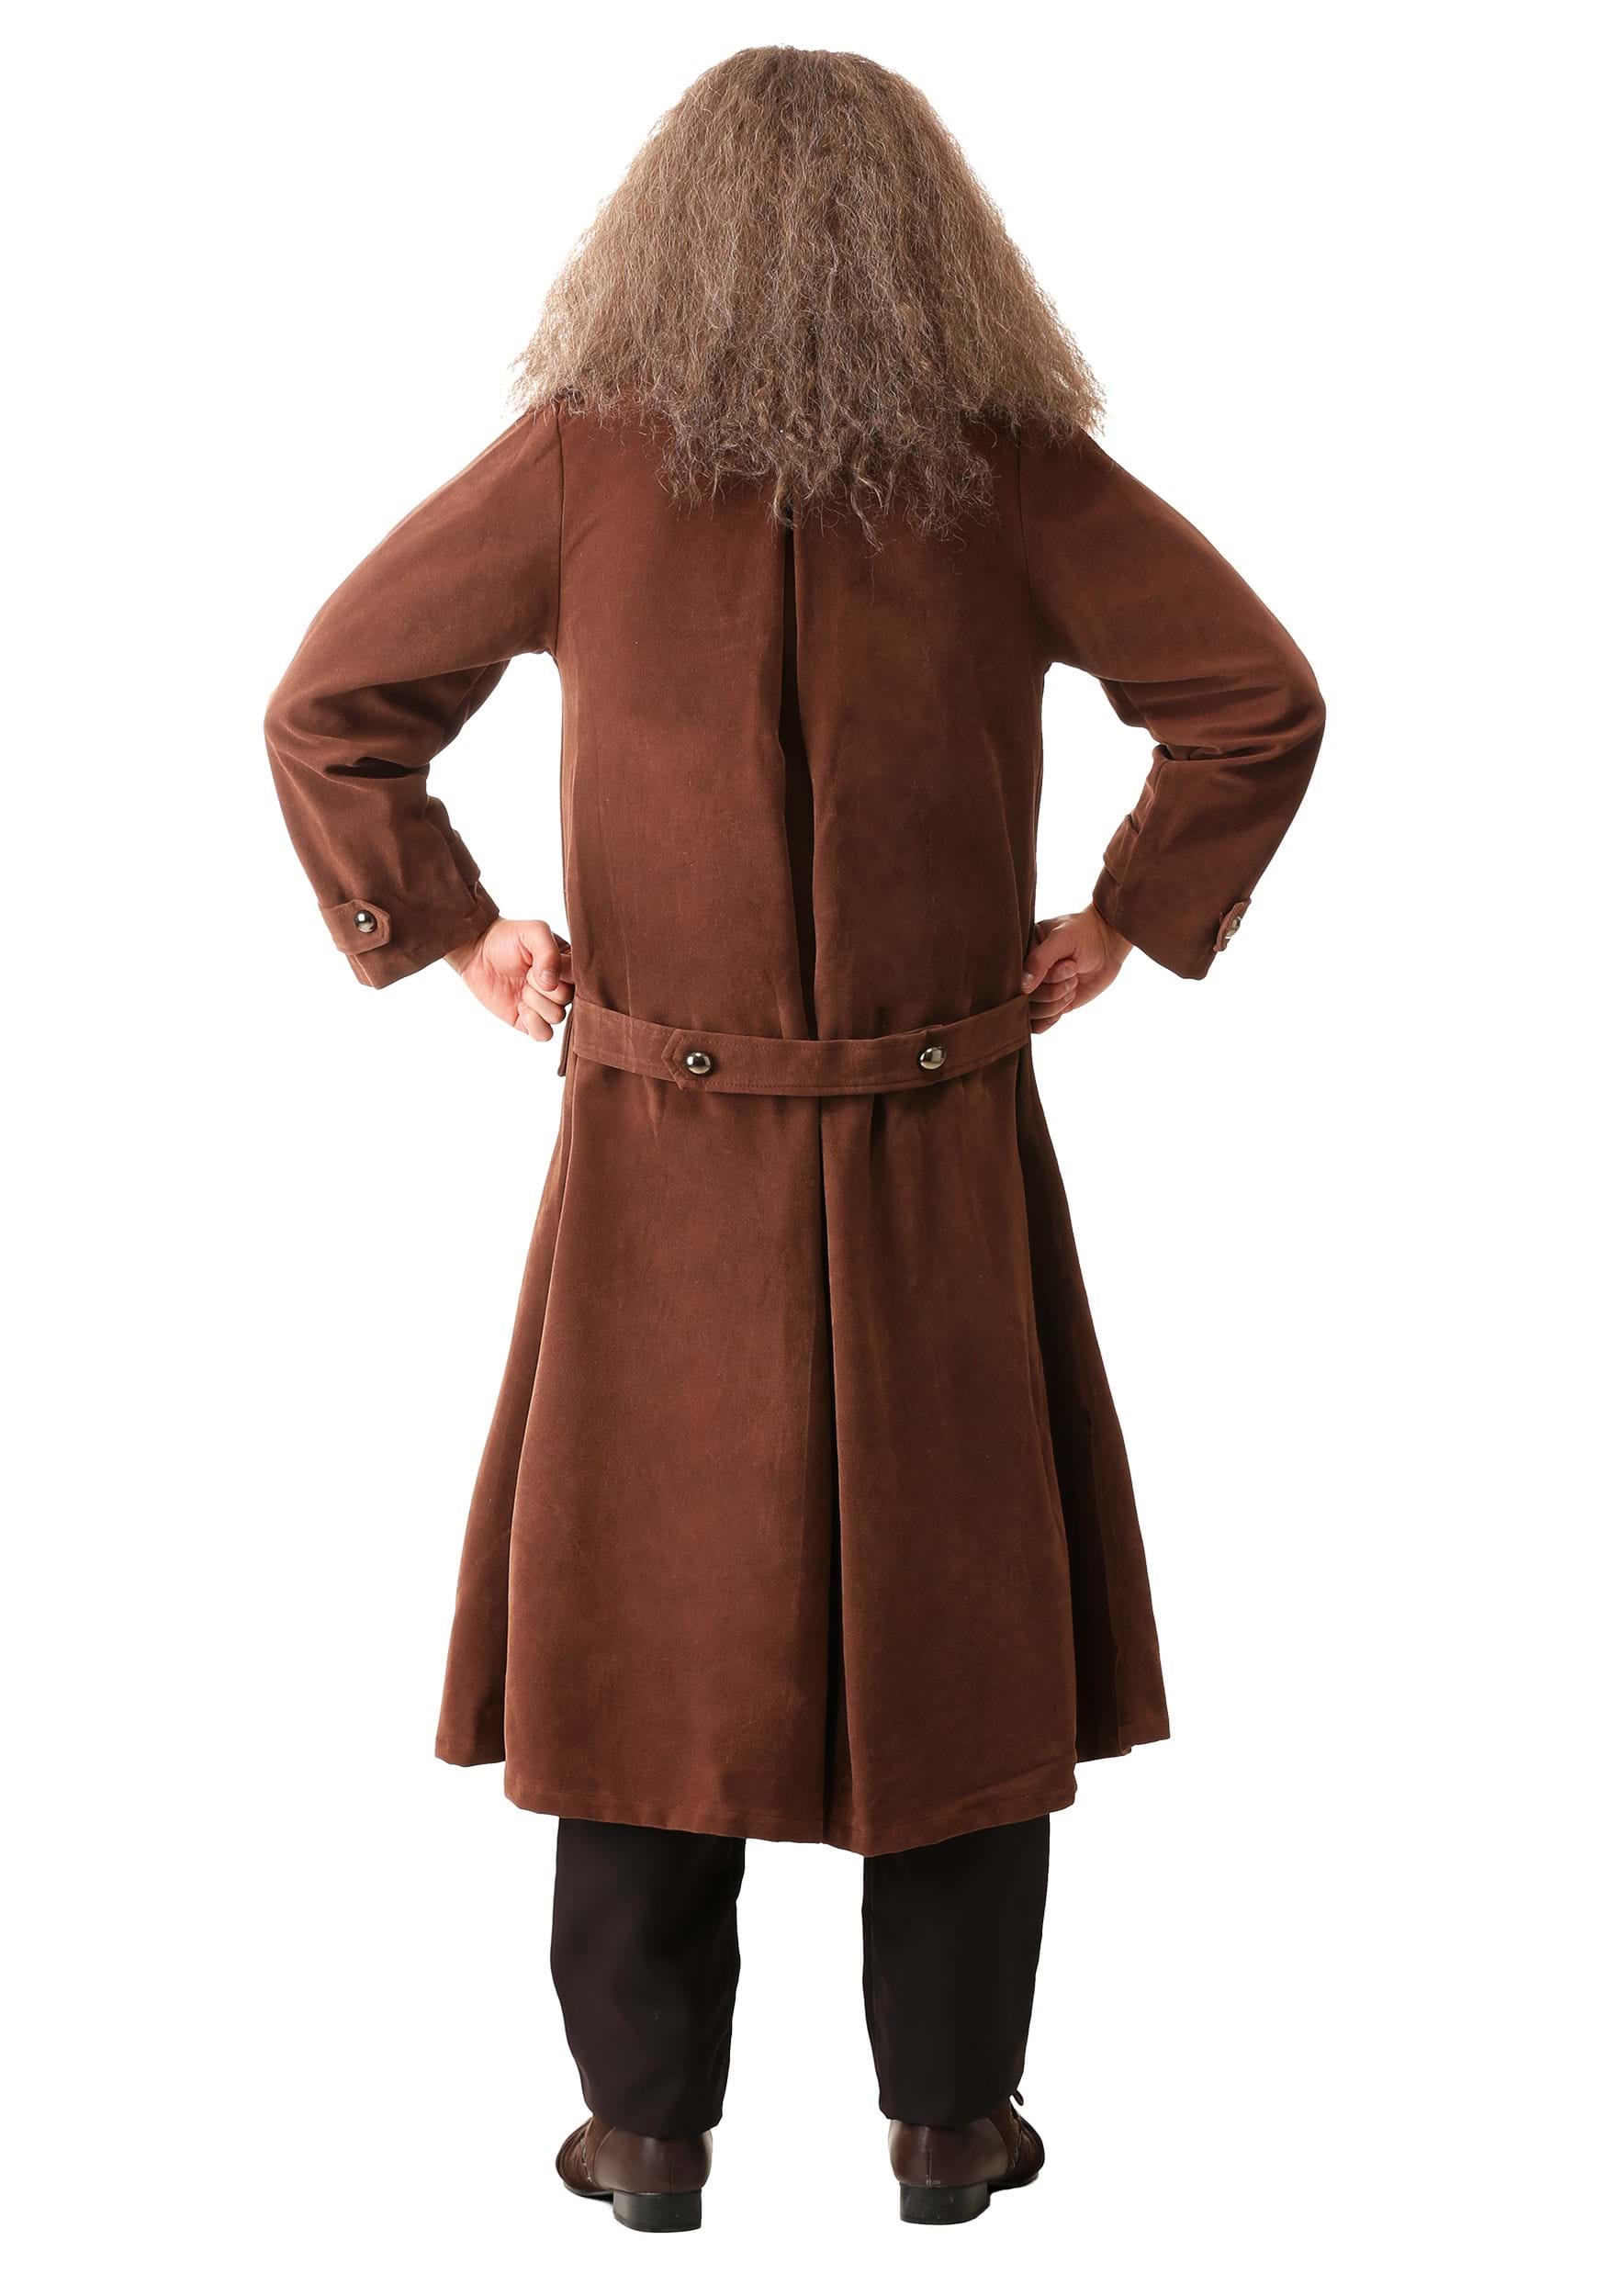 Deluxe Hagrid Costume For Adults